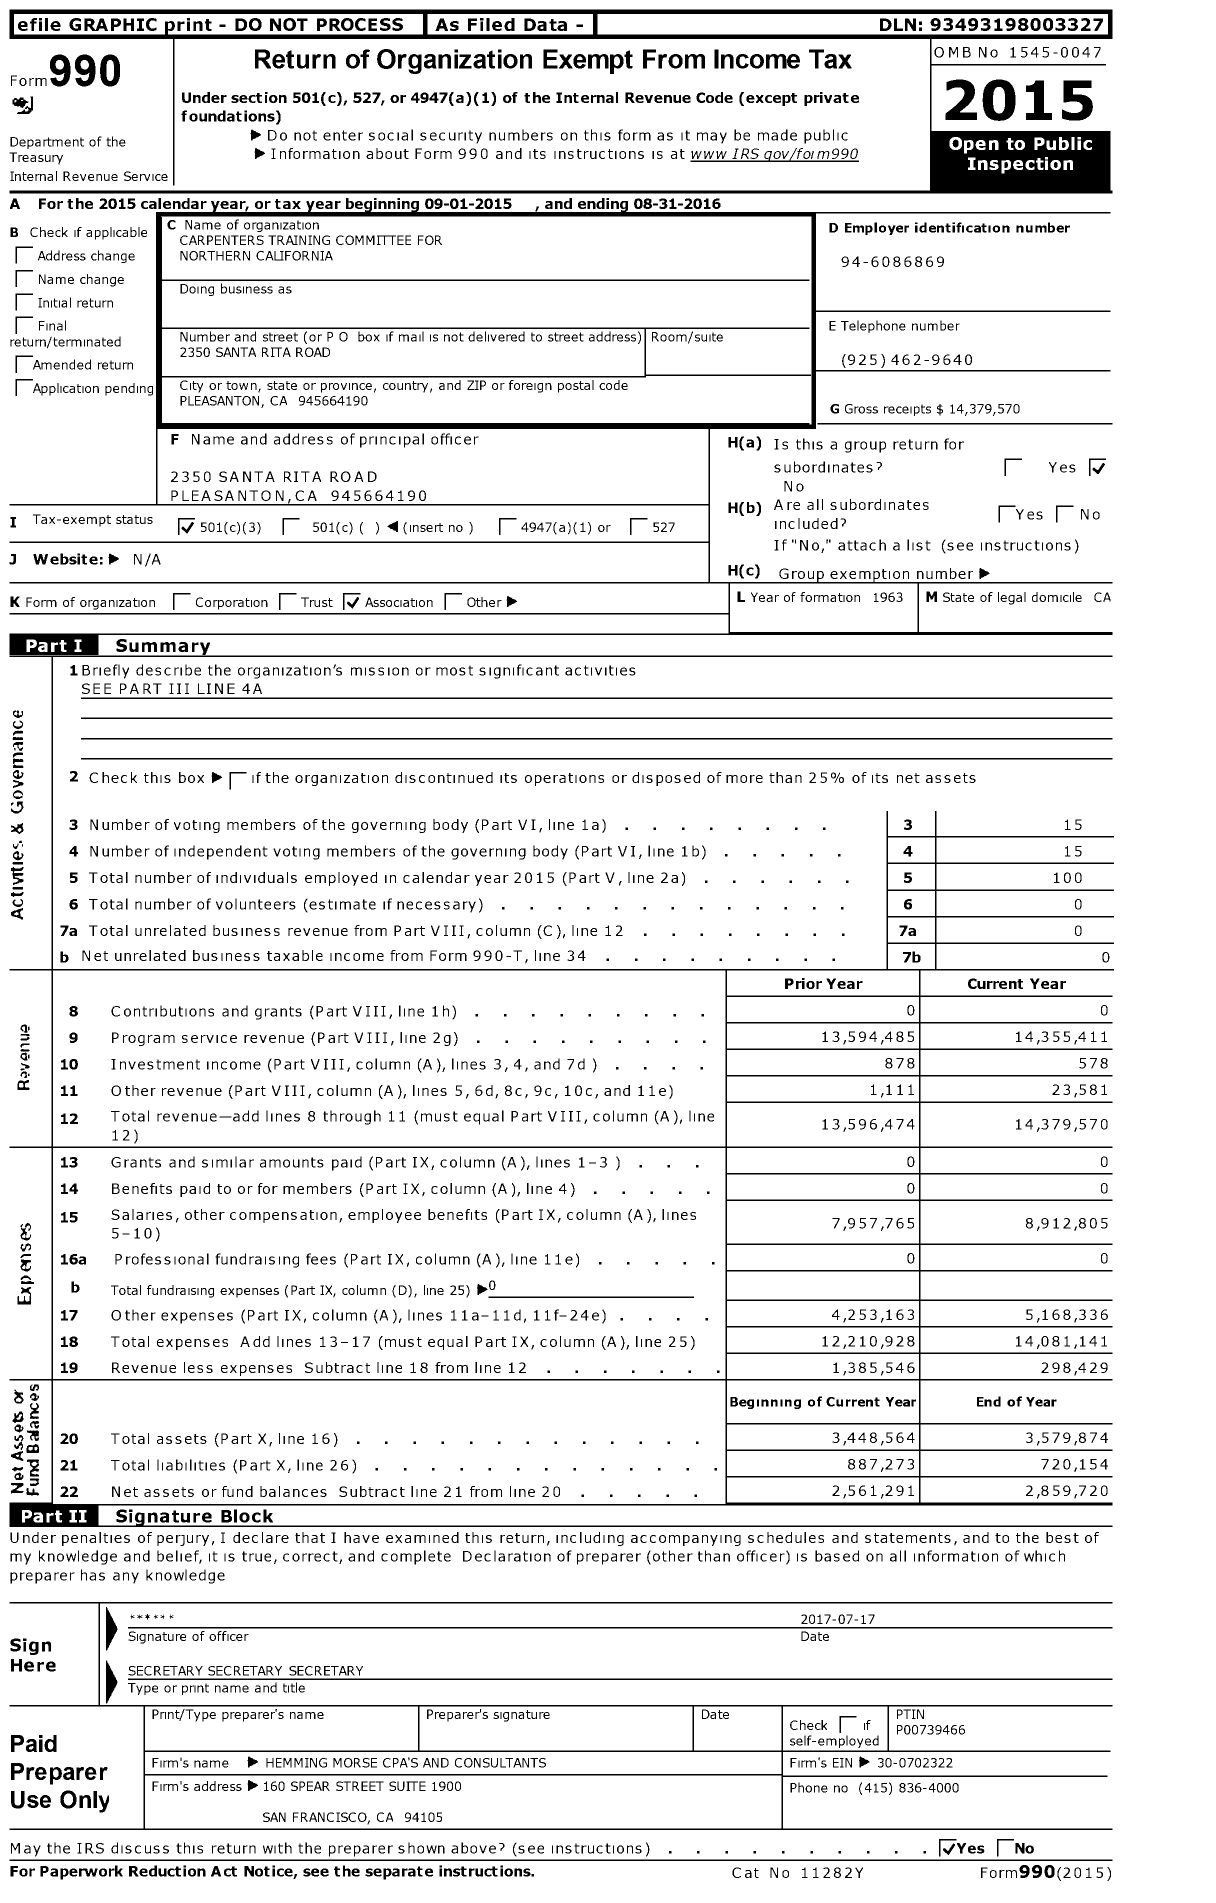 Image of first page of 2015 Form 990 for Carpenters Training Committee for Northern California